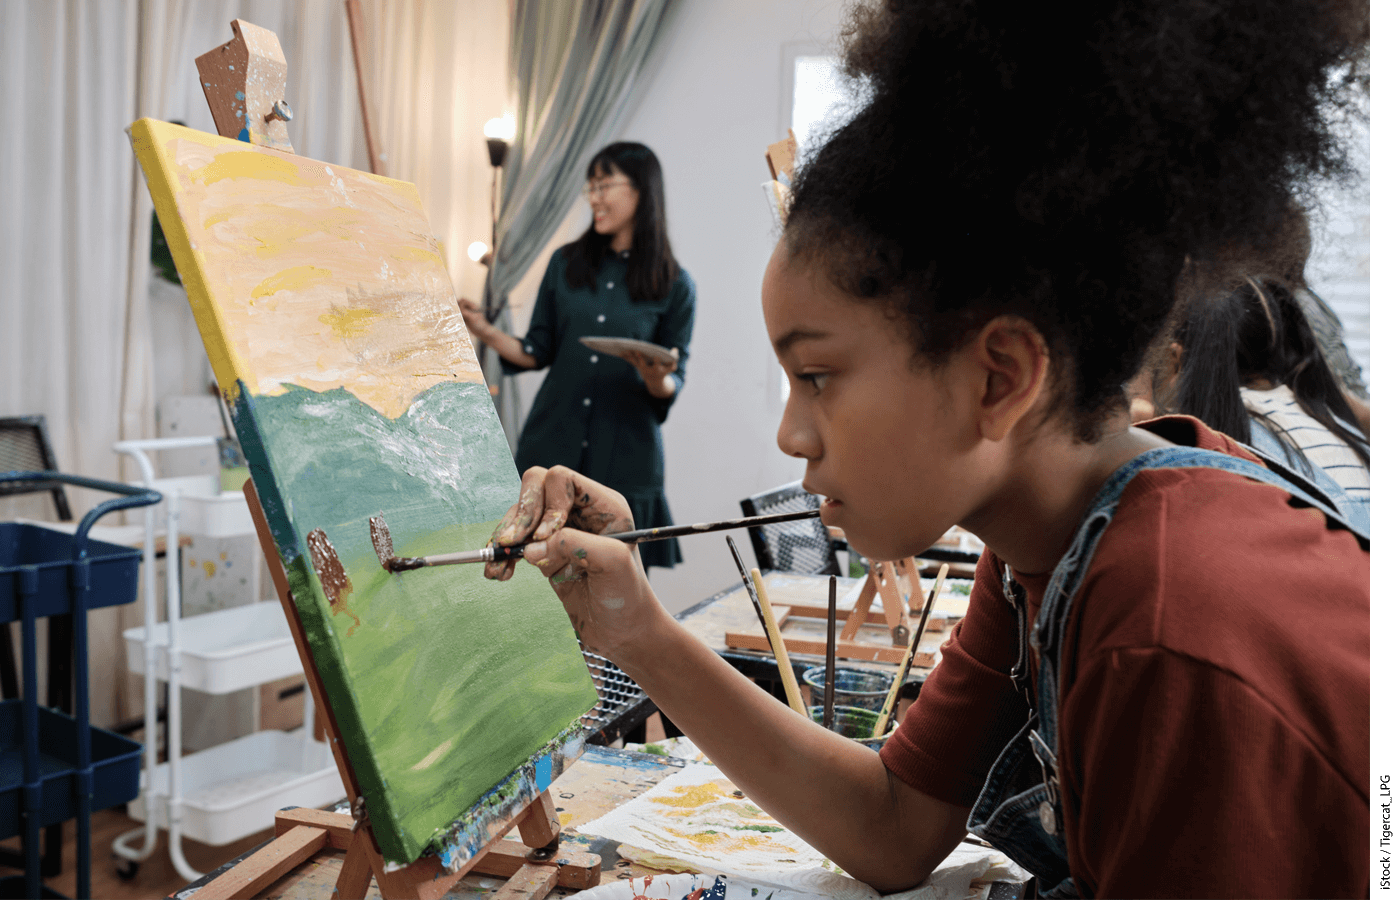 A student paints at an easel in art class